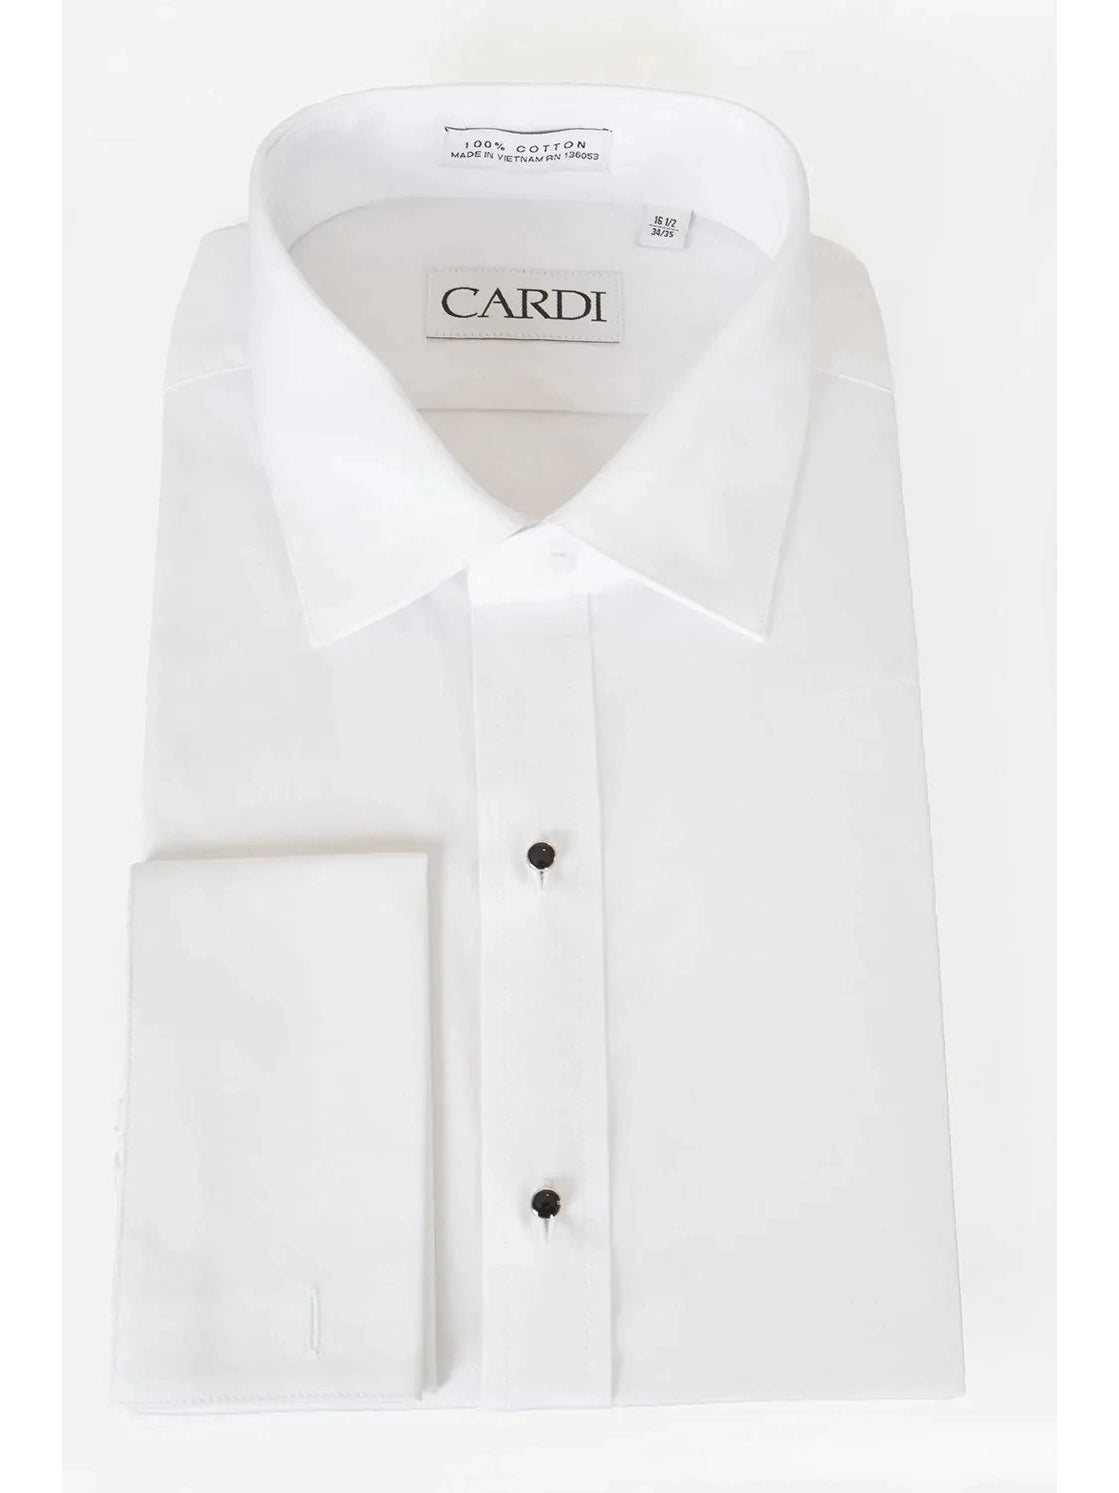 Men's Slim Fit- White Non-Pleated Spread Collar Tuxedo Shirt with French Cuffs